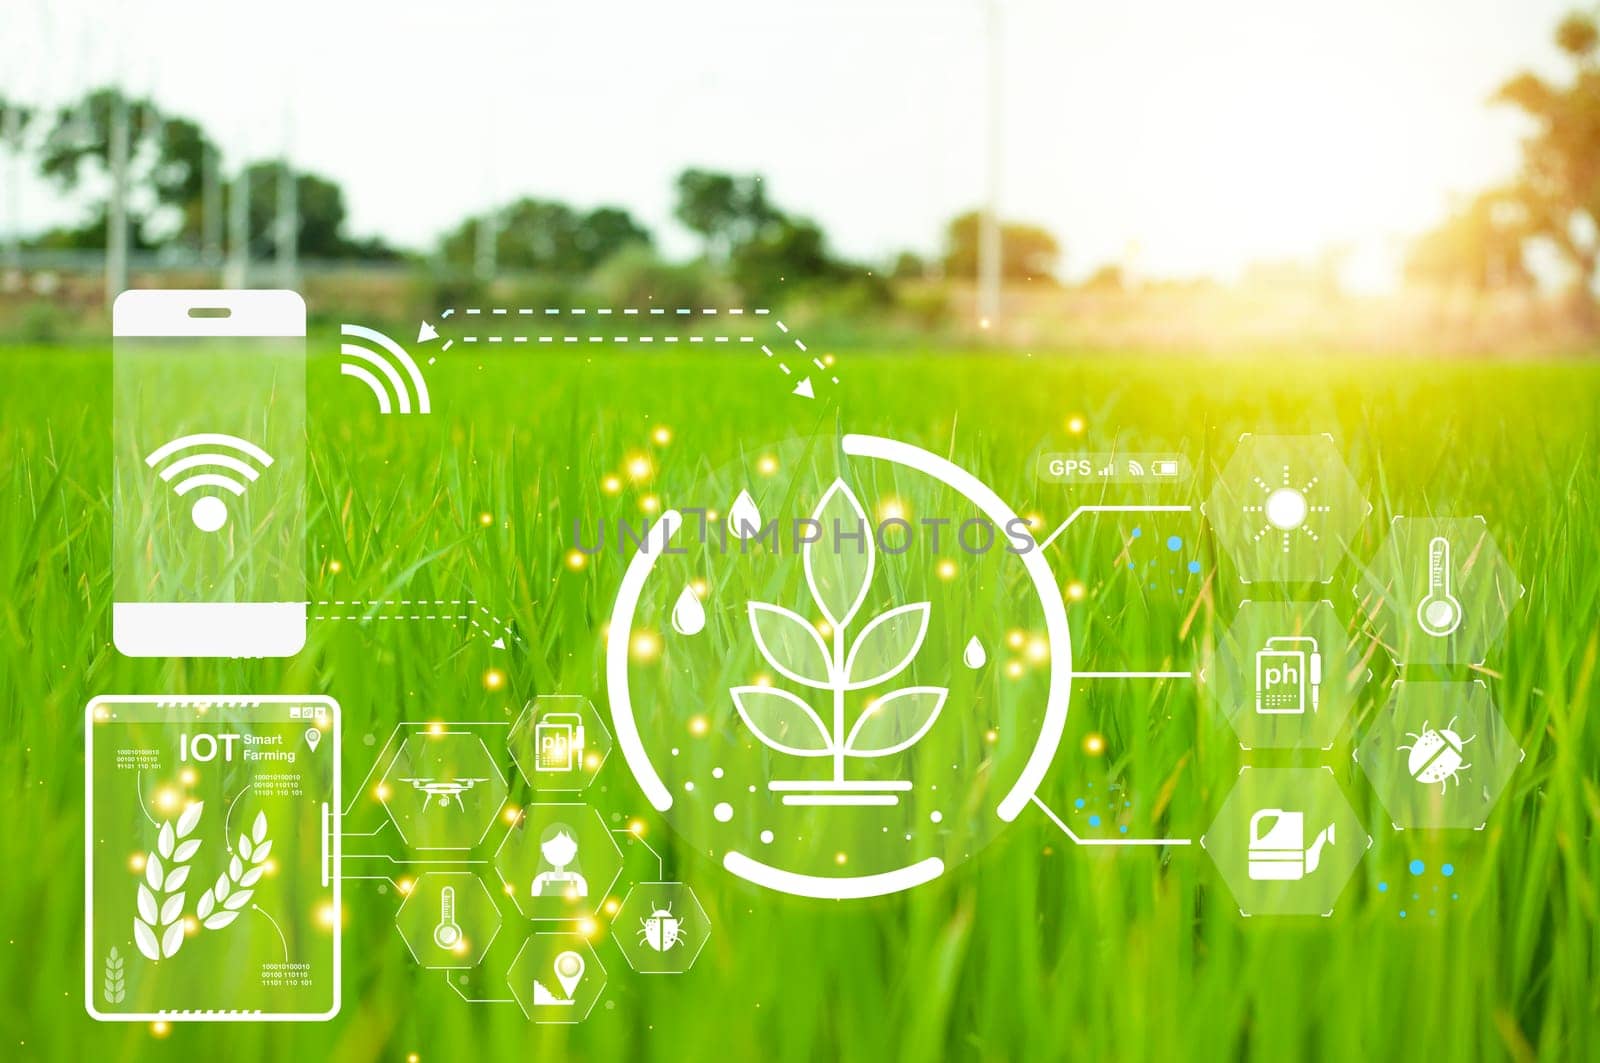 concept, use of technology to help manage, analyze, control agricultural production, IoT